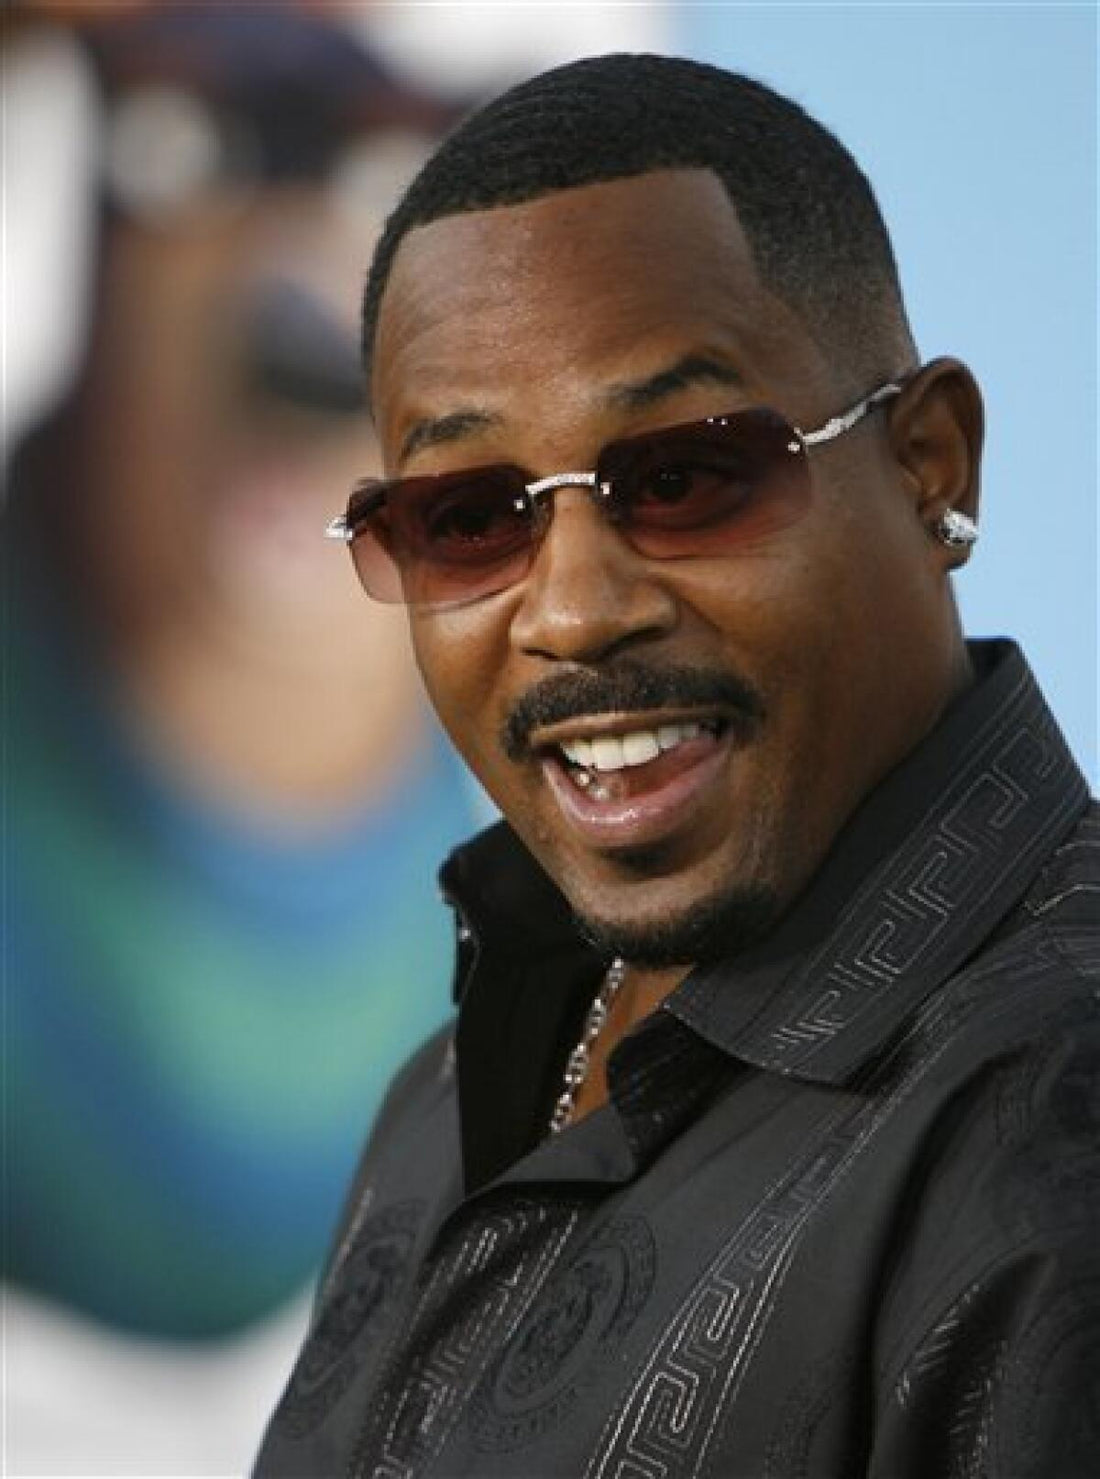 NOW BOOKING MARTIN LAWRENCE